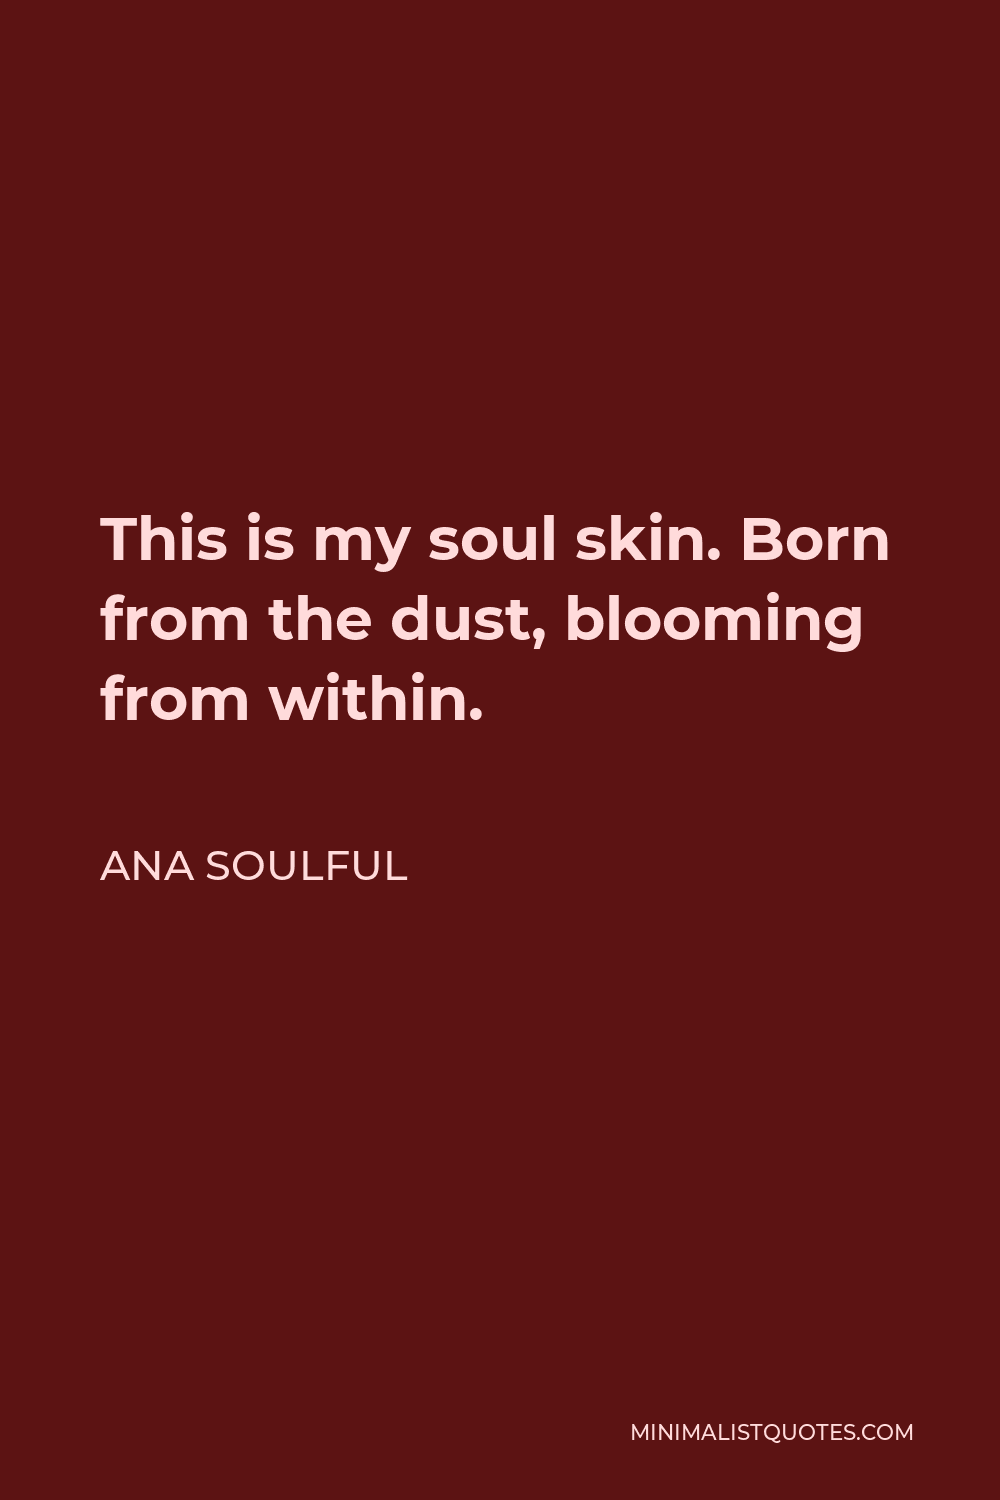 Ana Soulful Quote - This is my soul skin. Born from the dust, blooming from within.